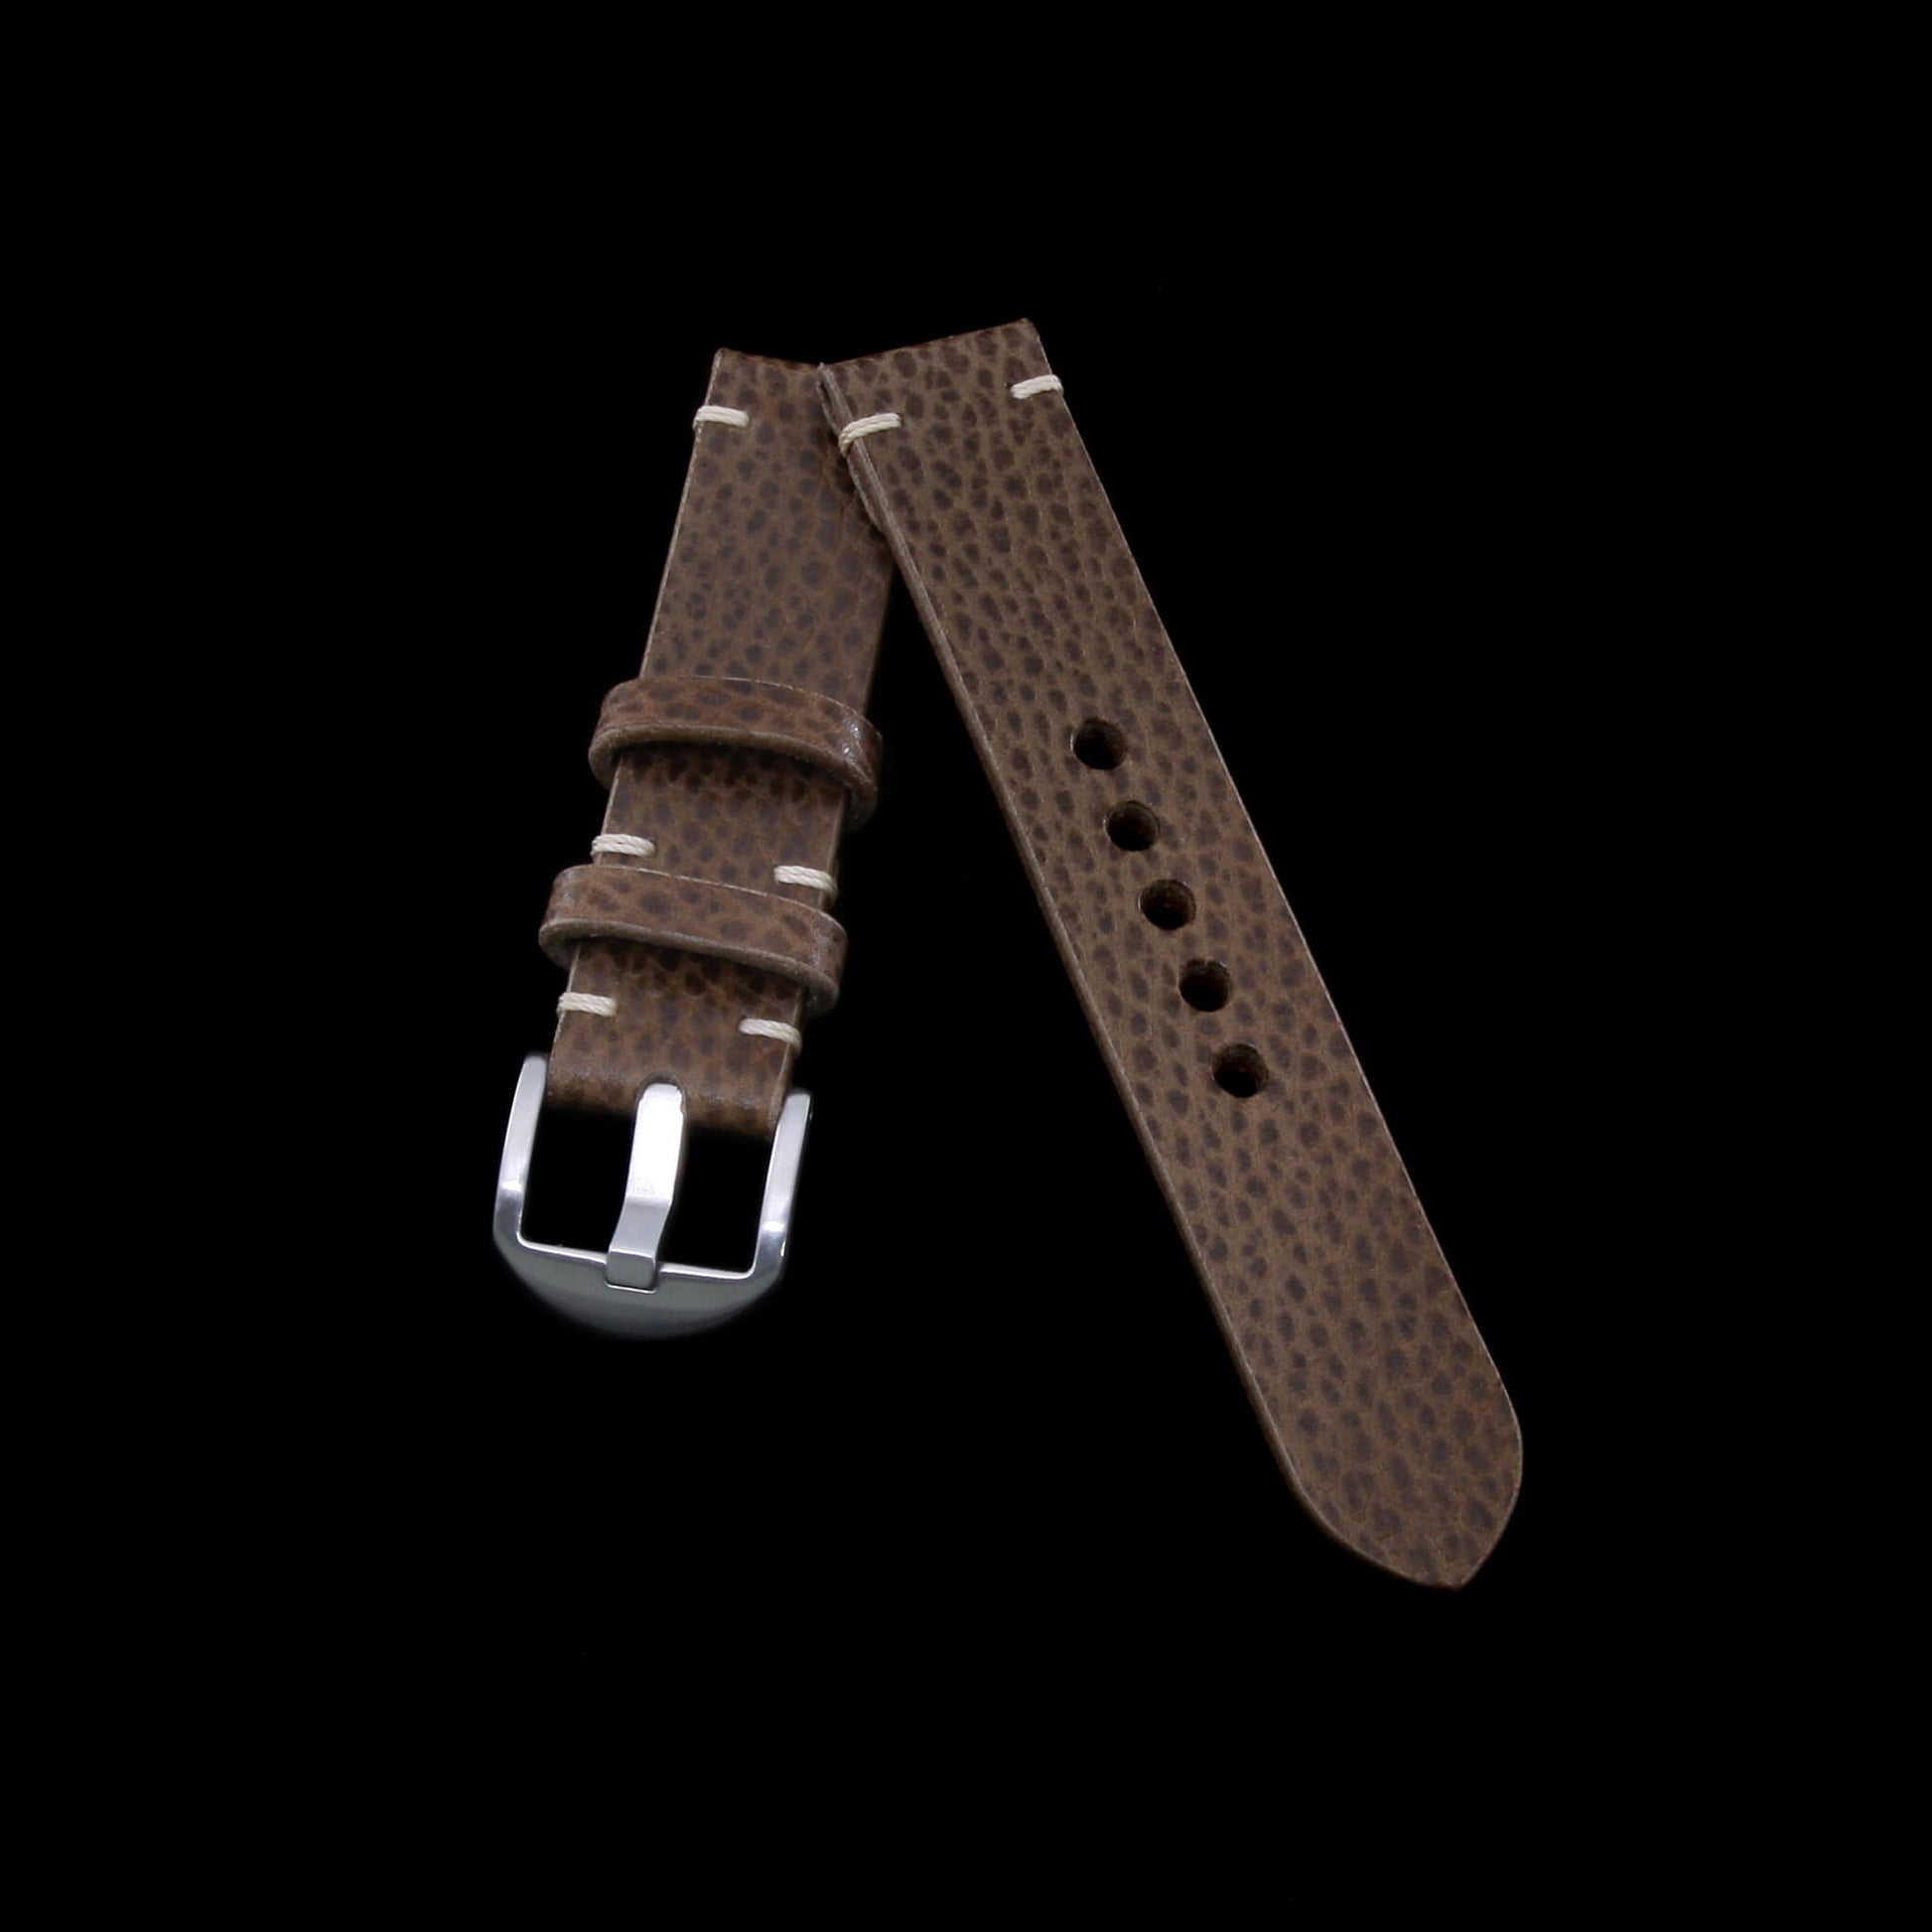 2-Piece Minimalist Leather Watch Strap, made with Buttero Taupe full grain Italian veg-tanned leather by Cozy Handmade